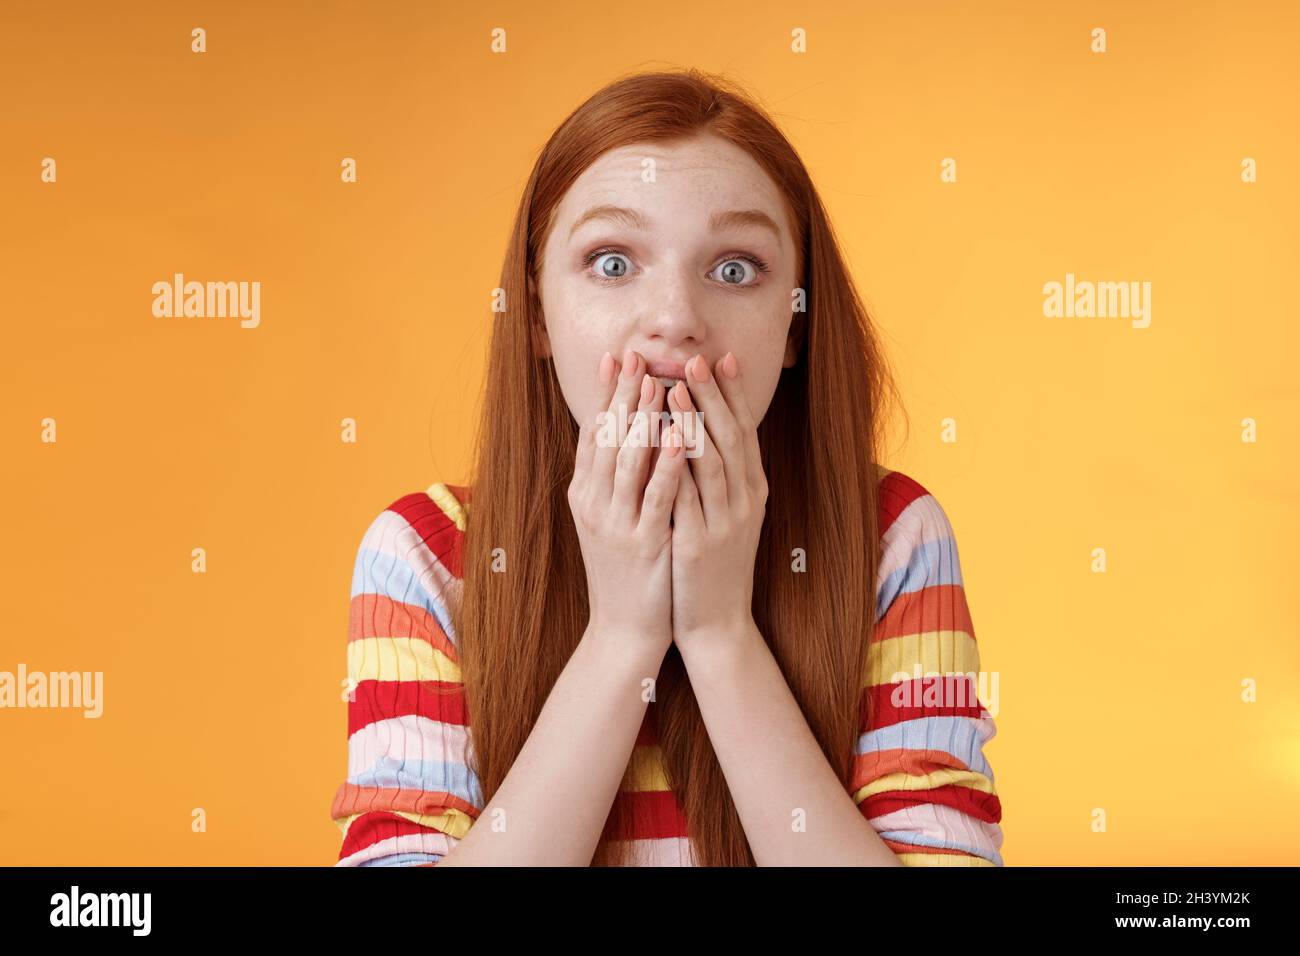 Excited shocked redhead speechless girl like gossiping standing emotional astonished hear amusing story gasping full disbelief c Stock Photo